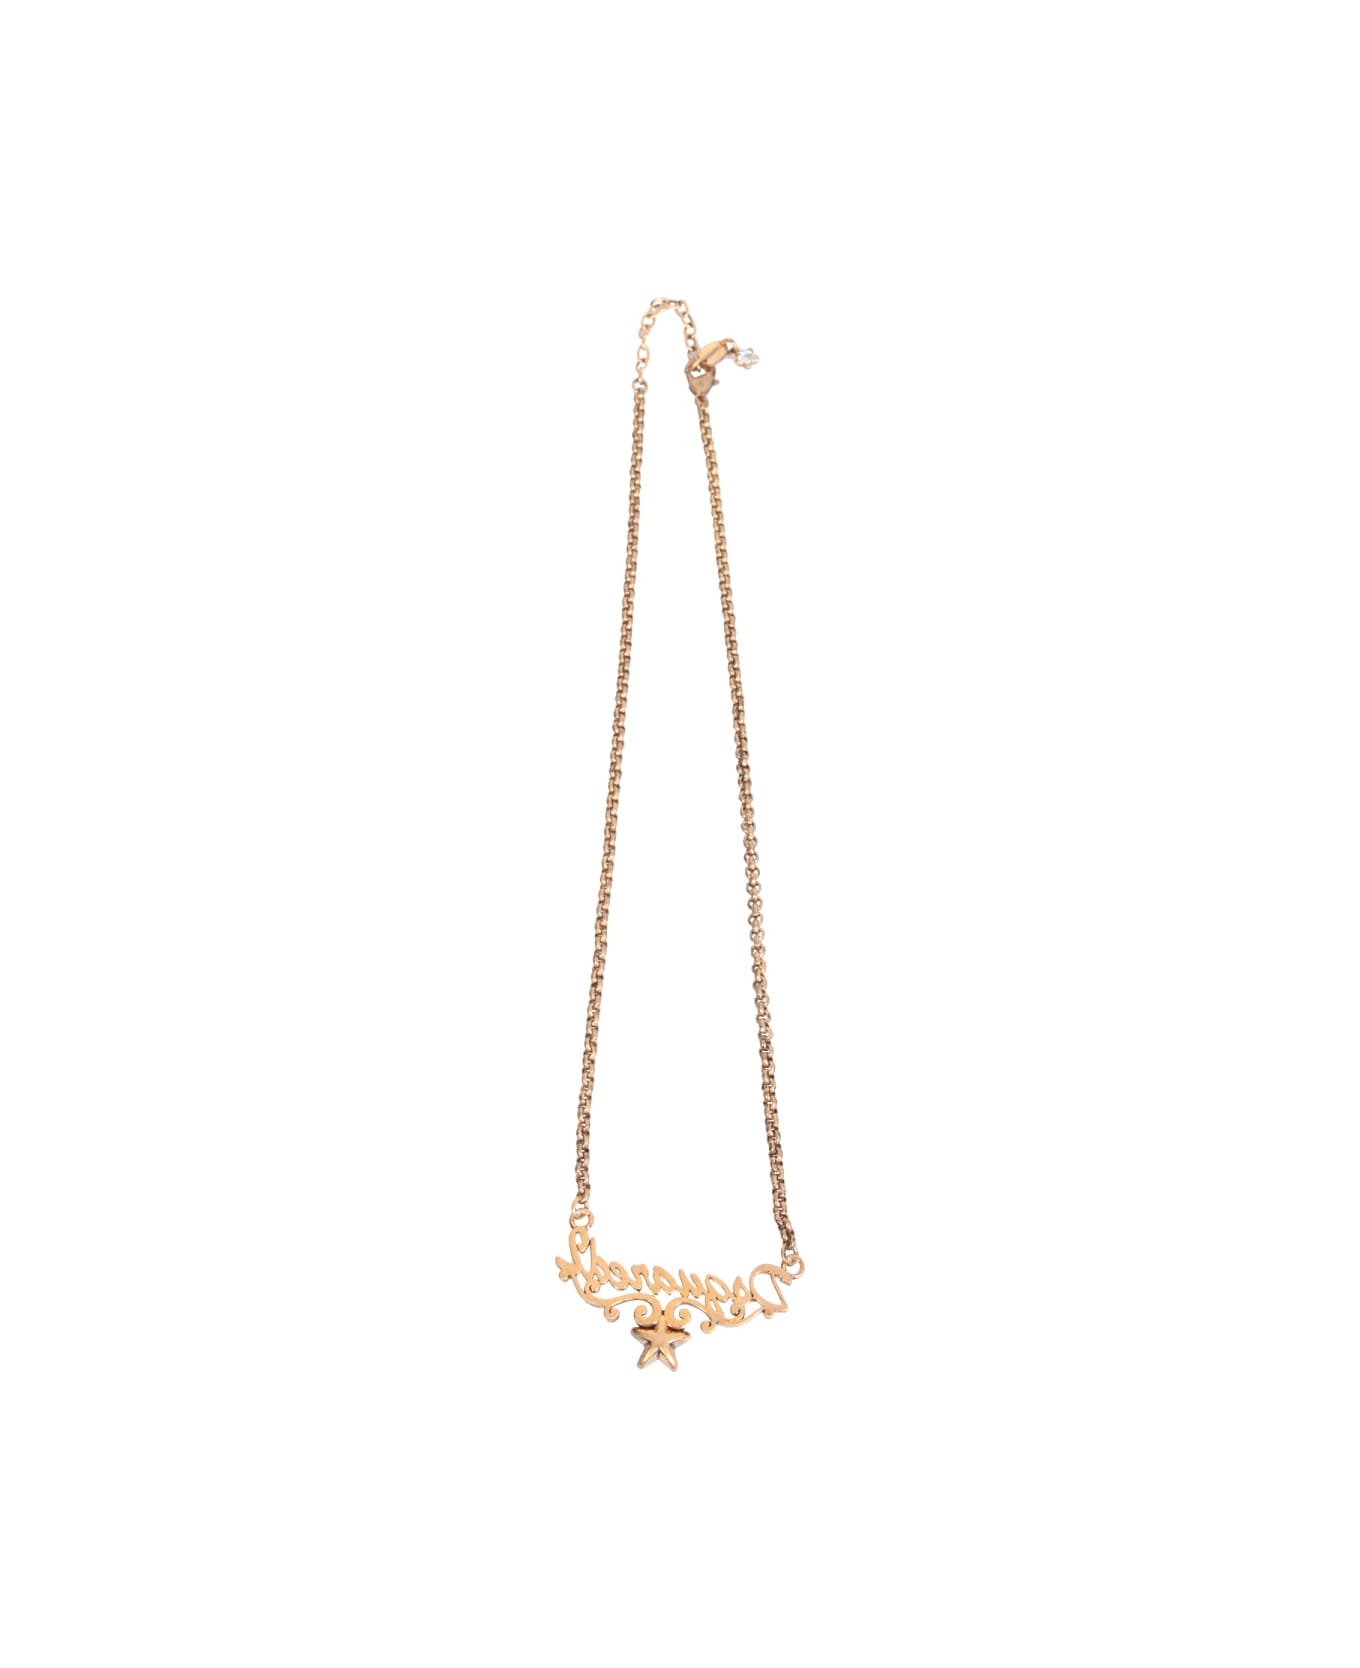 Dsquared2 Twinkle Necklace - GOLD ネックレス